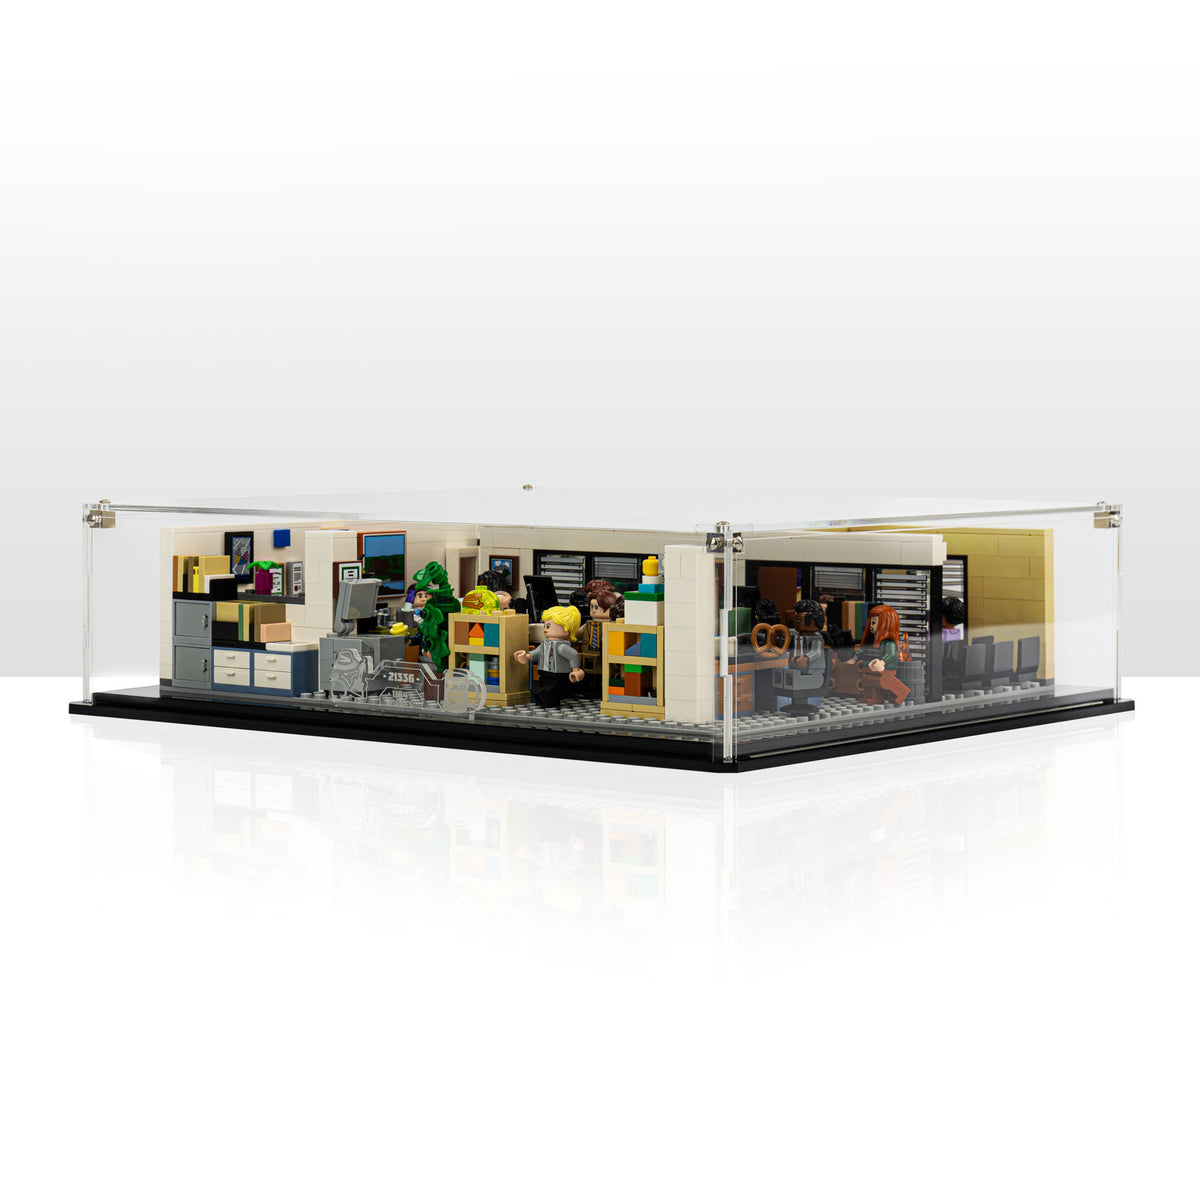 Acrylic Displays for your Lego Models-Lego 21319 Friends TV Series